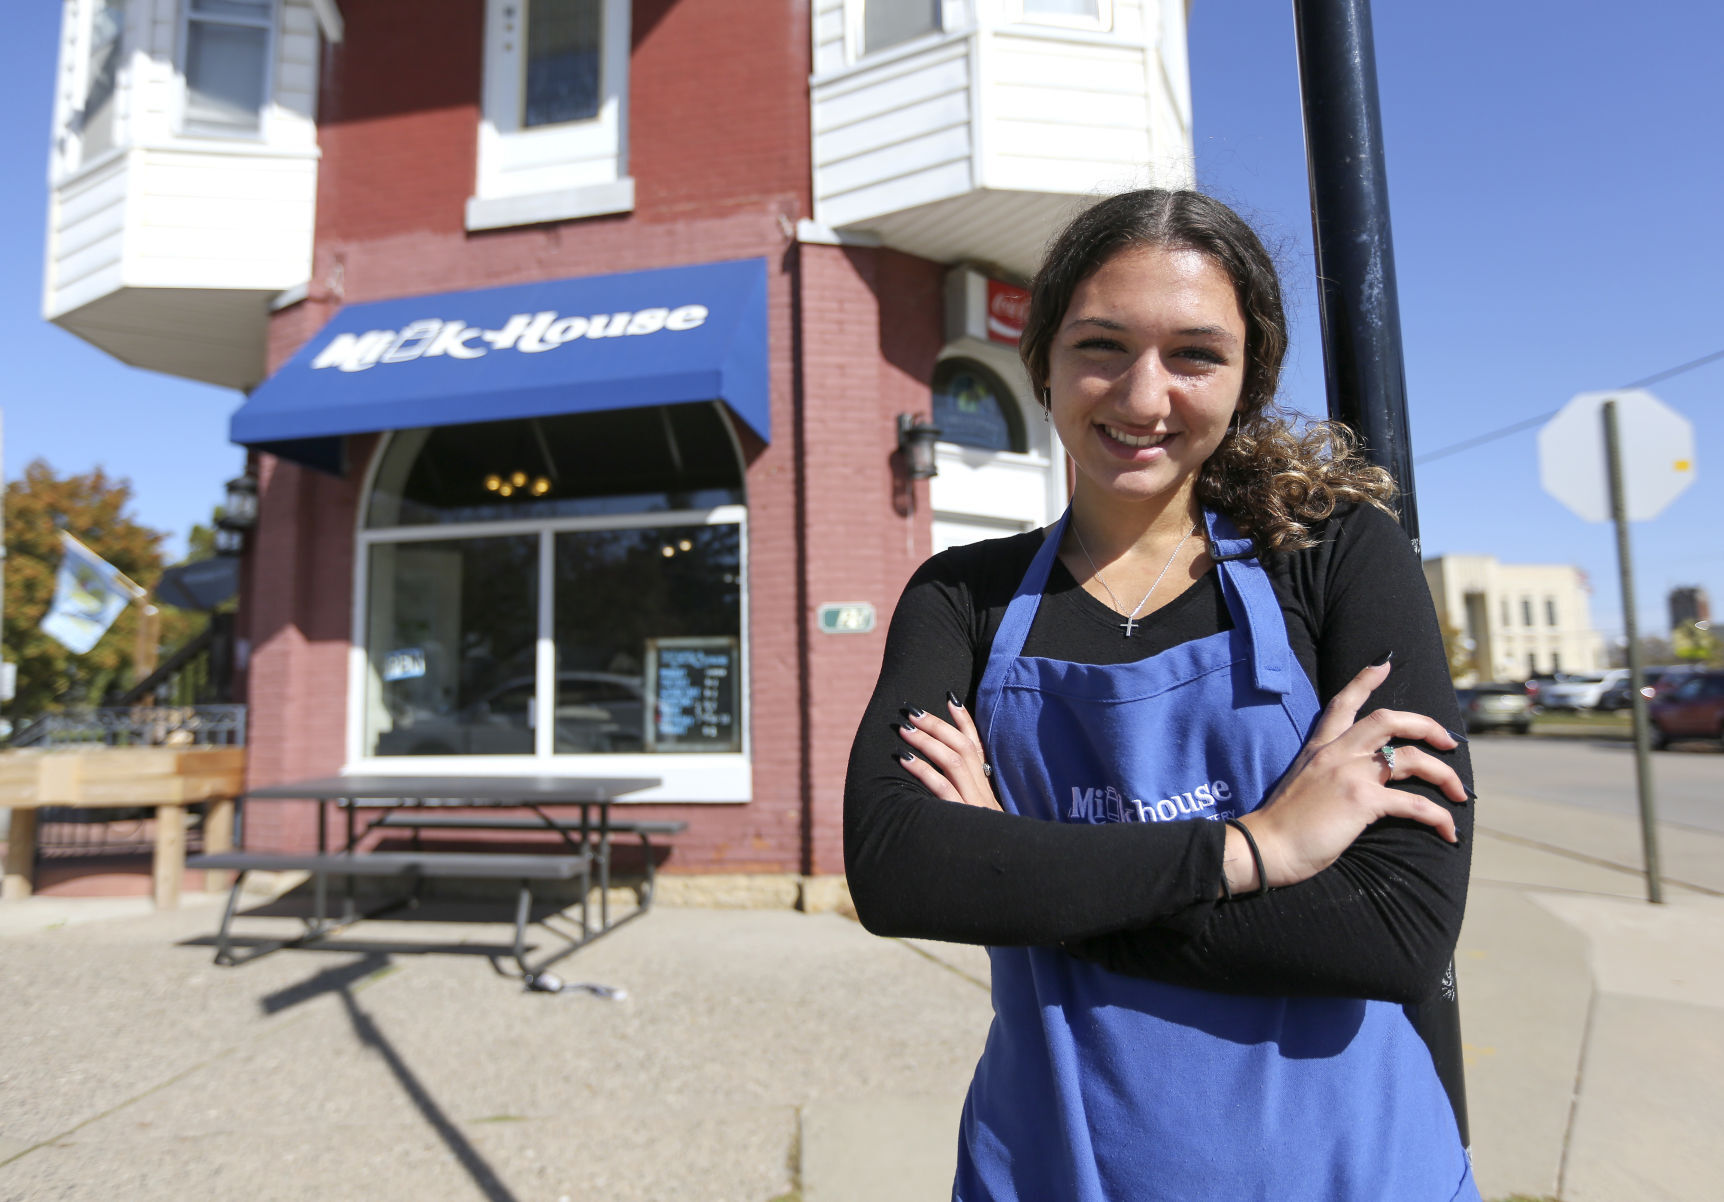 Elyza Hoffman, 17, has worked at Milk House Aristan Eatery, Baked Goods & Catering for the past two years. PHOTO CREDIT: Dave Kettering